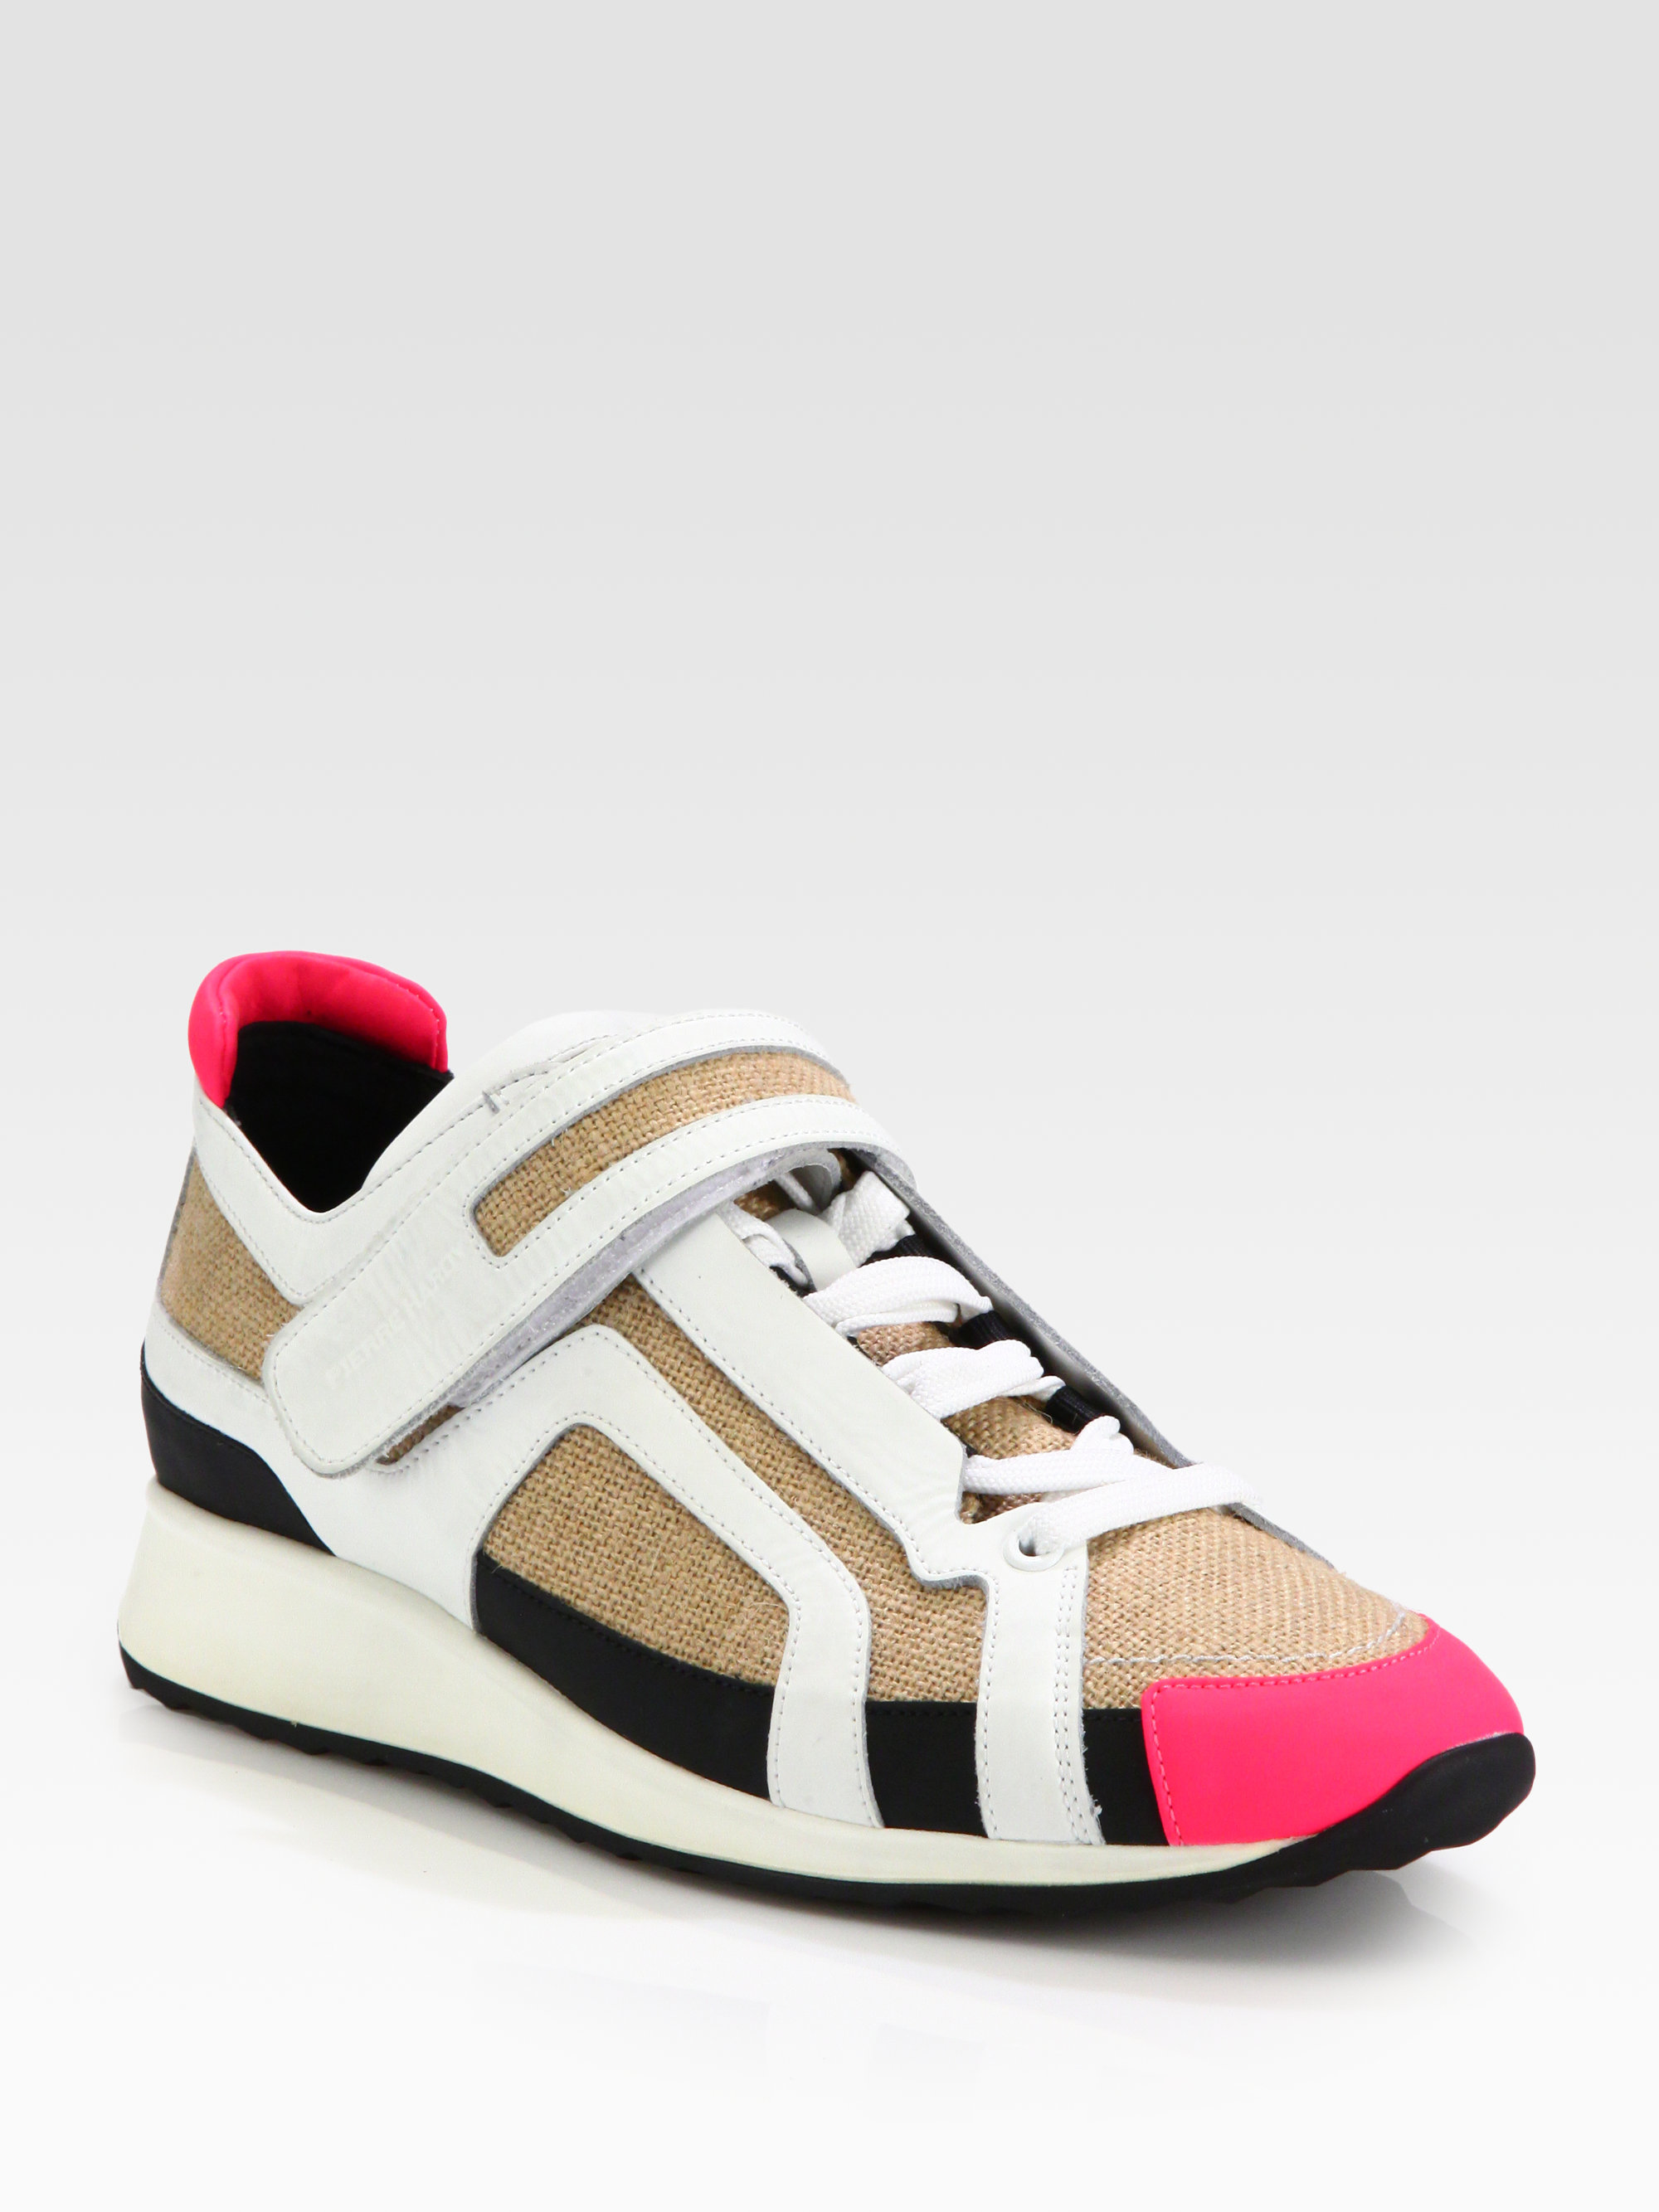 Pierre hardy Canvas Leather Trimmed Lace-Up Sneakers in Pink | Lyst